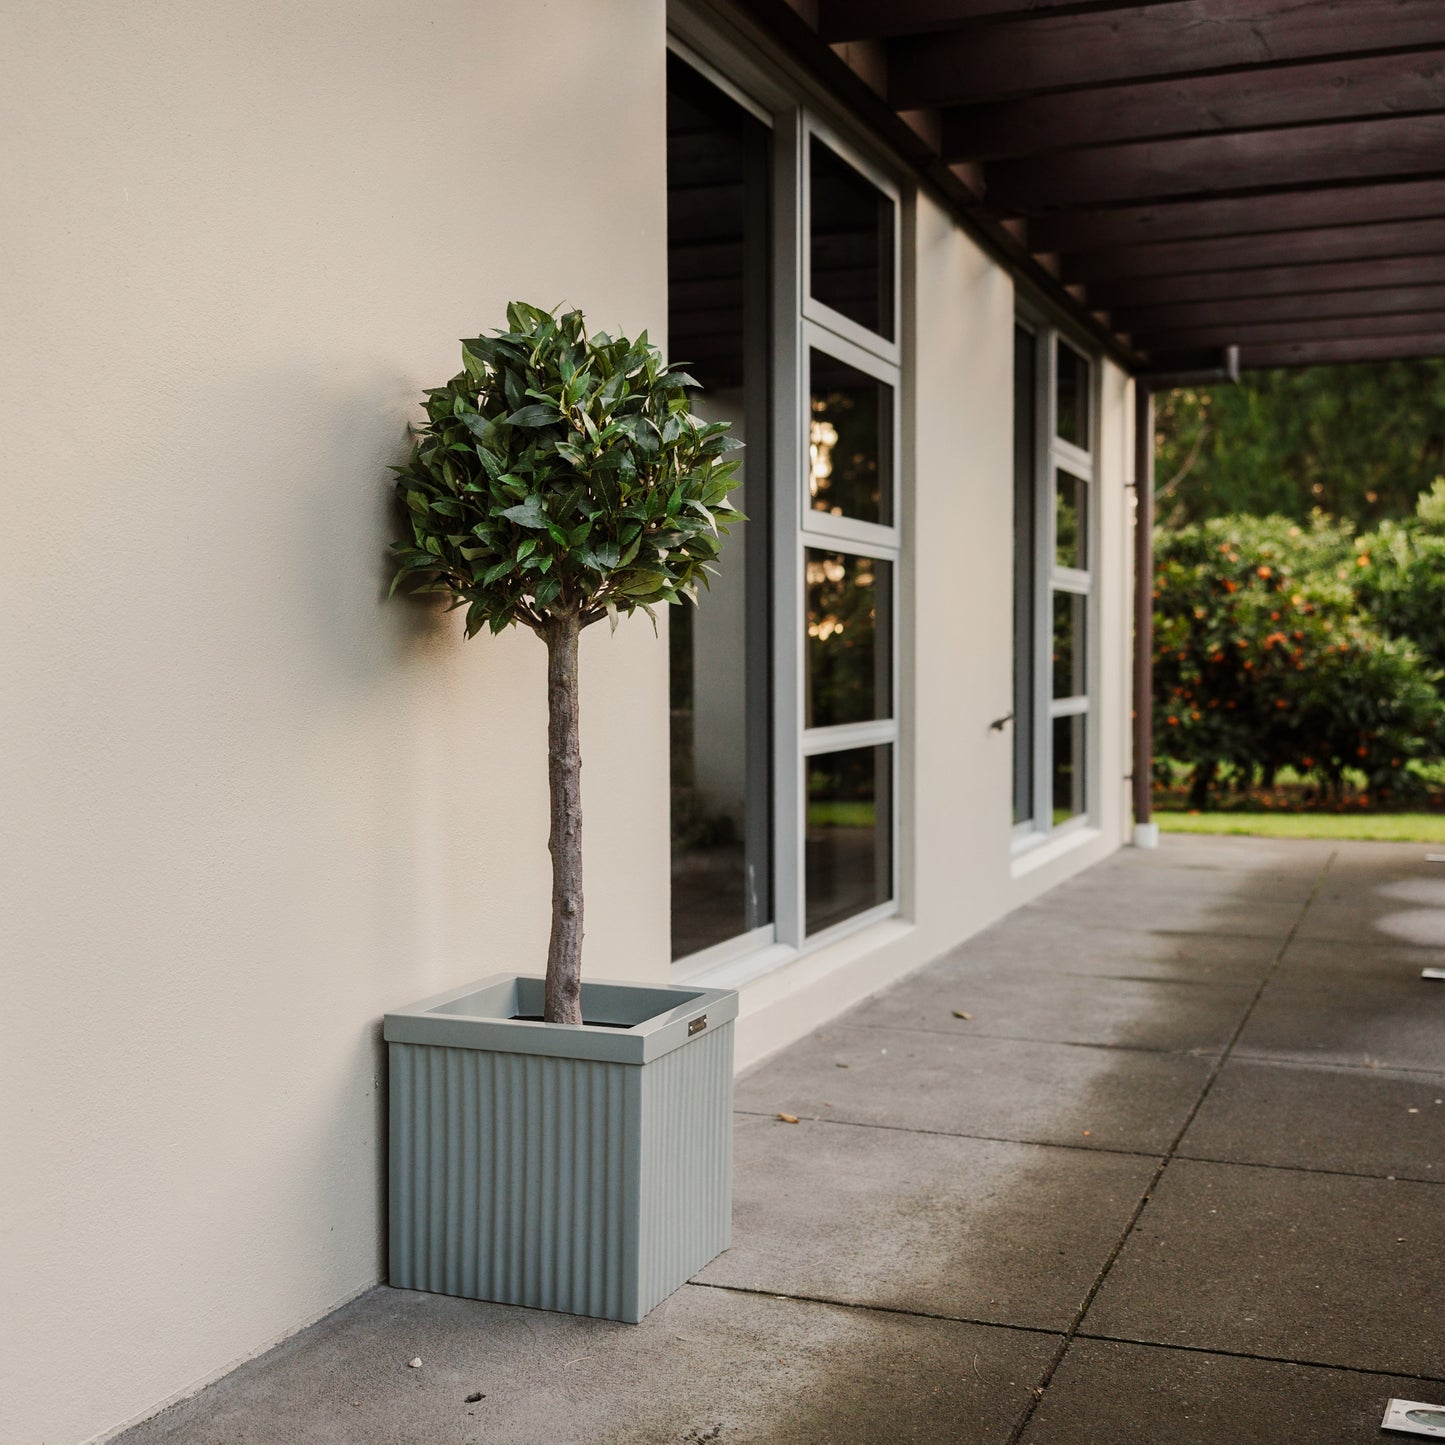 A square Modscene planter in front of house planted with a bay tree.